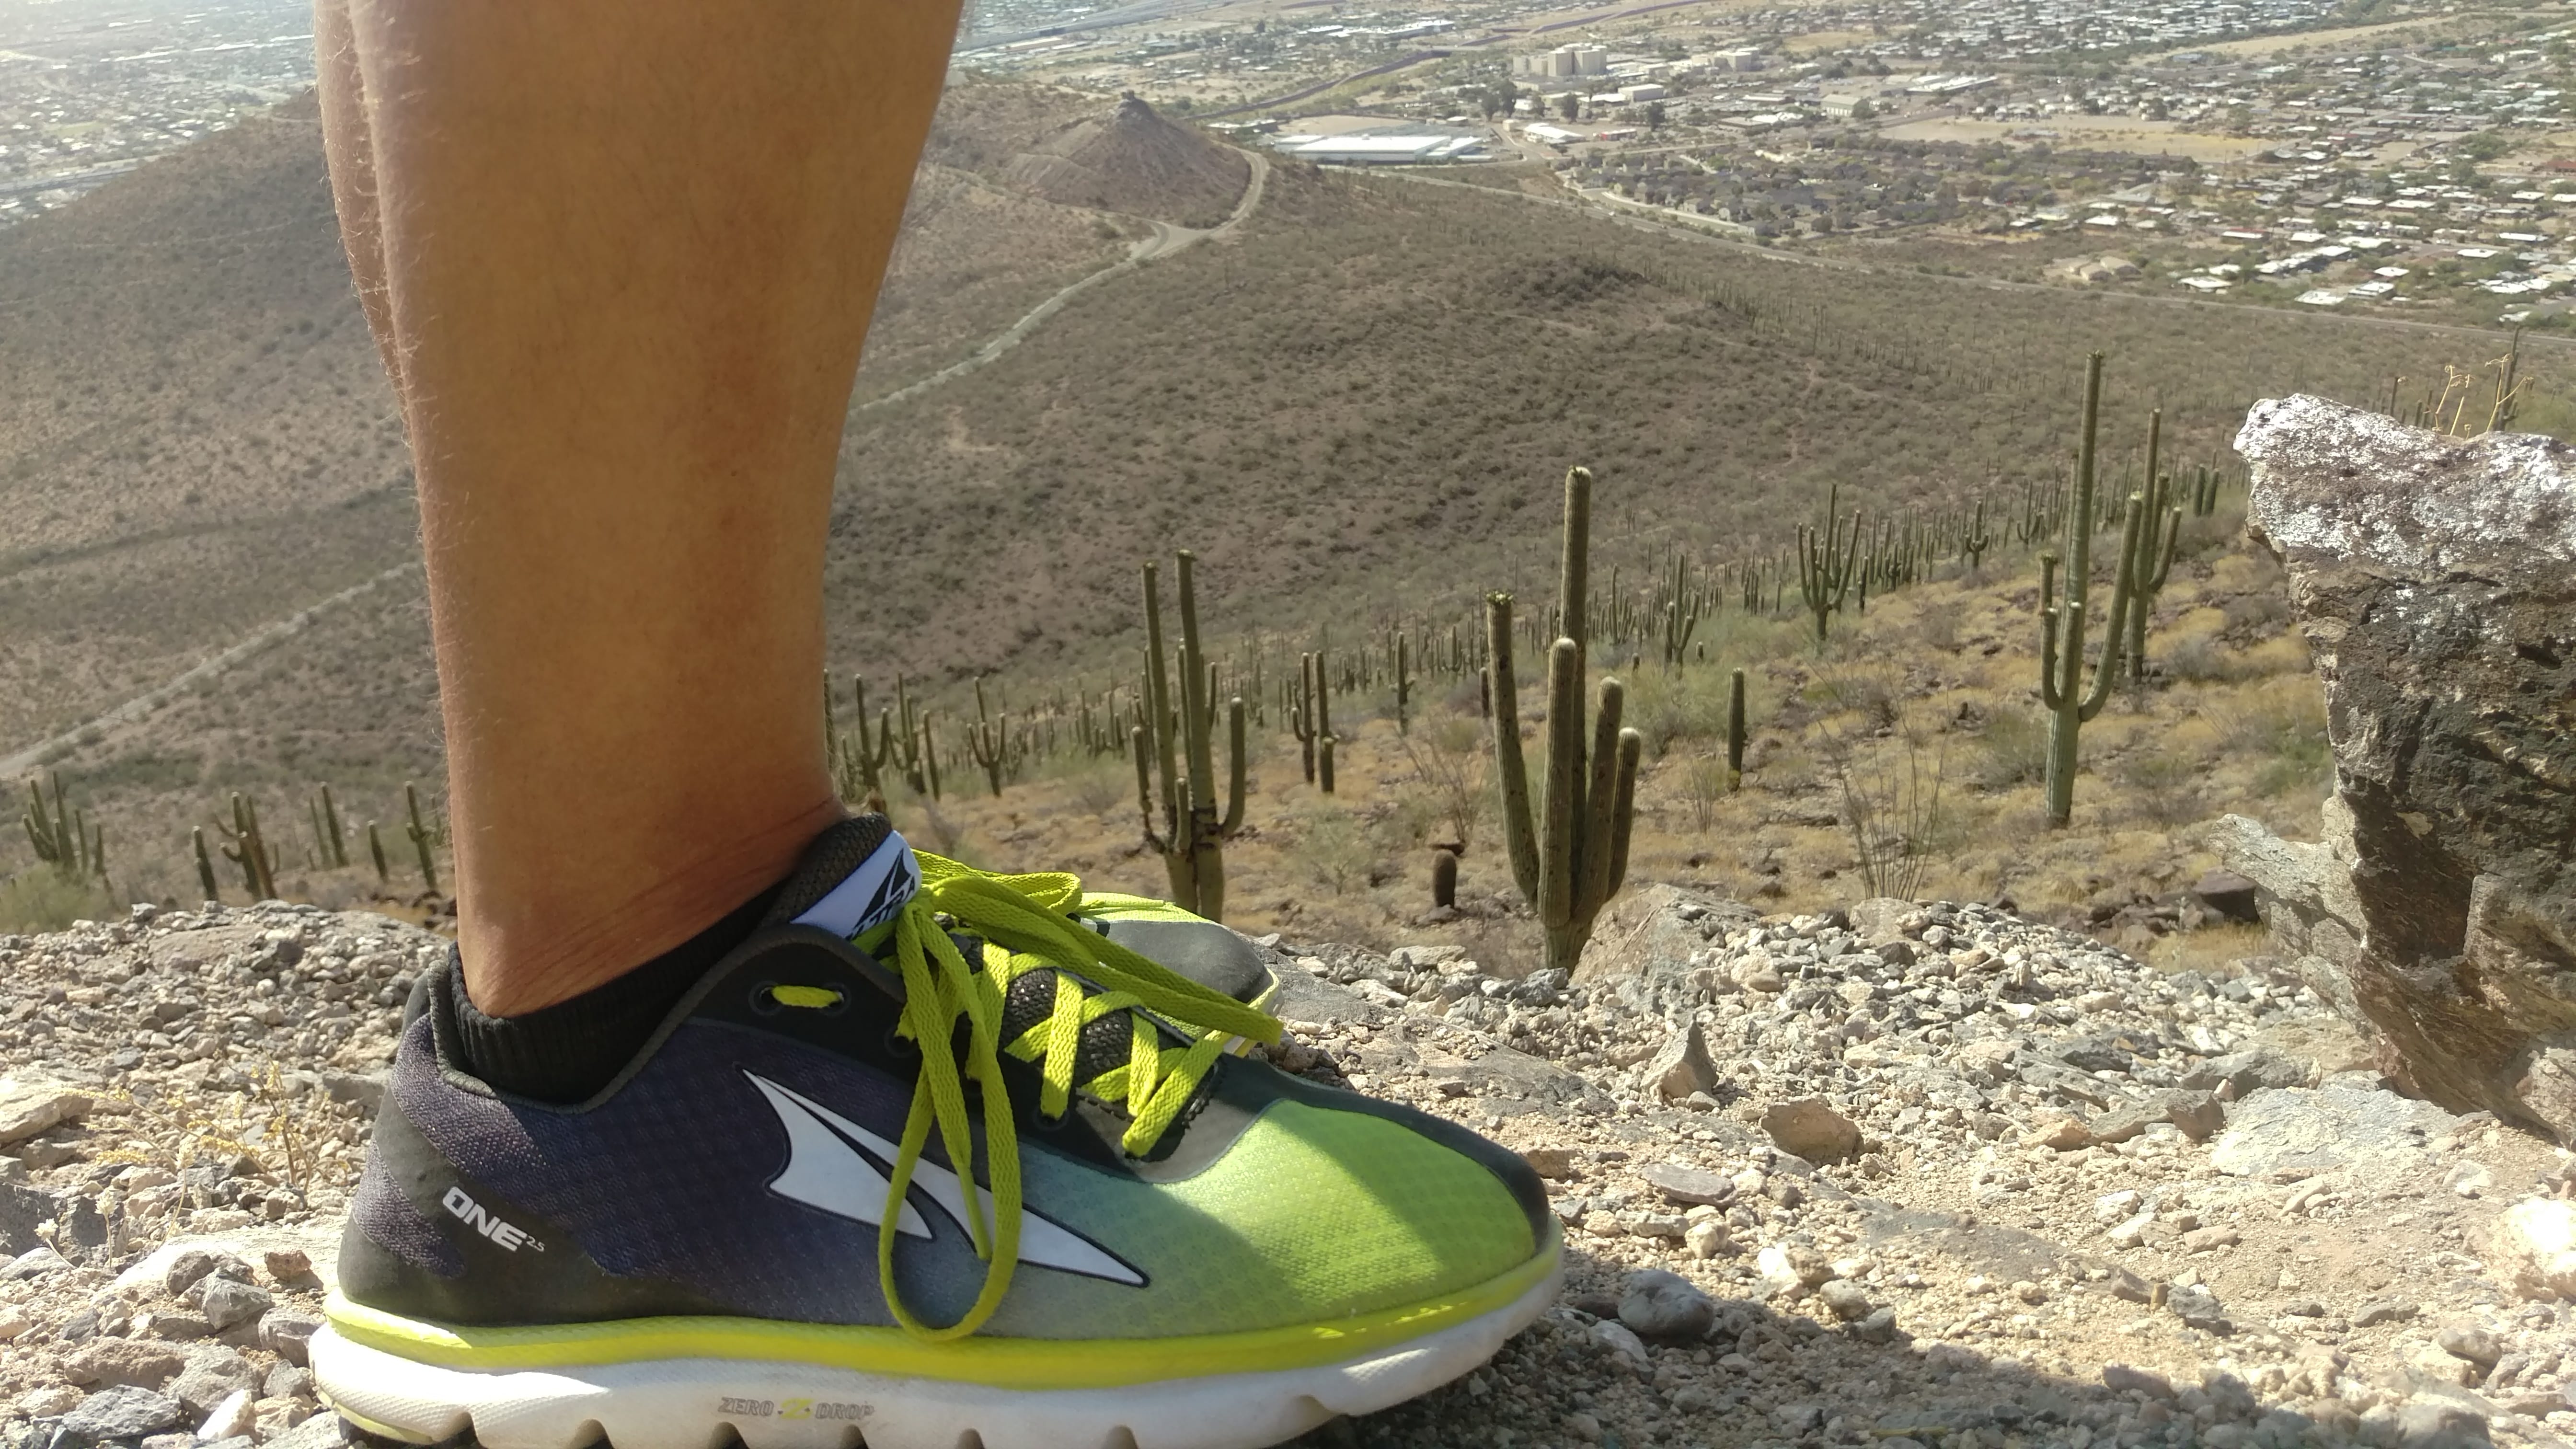 Gear Review: Altra Running Shoes - The 